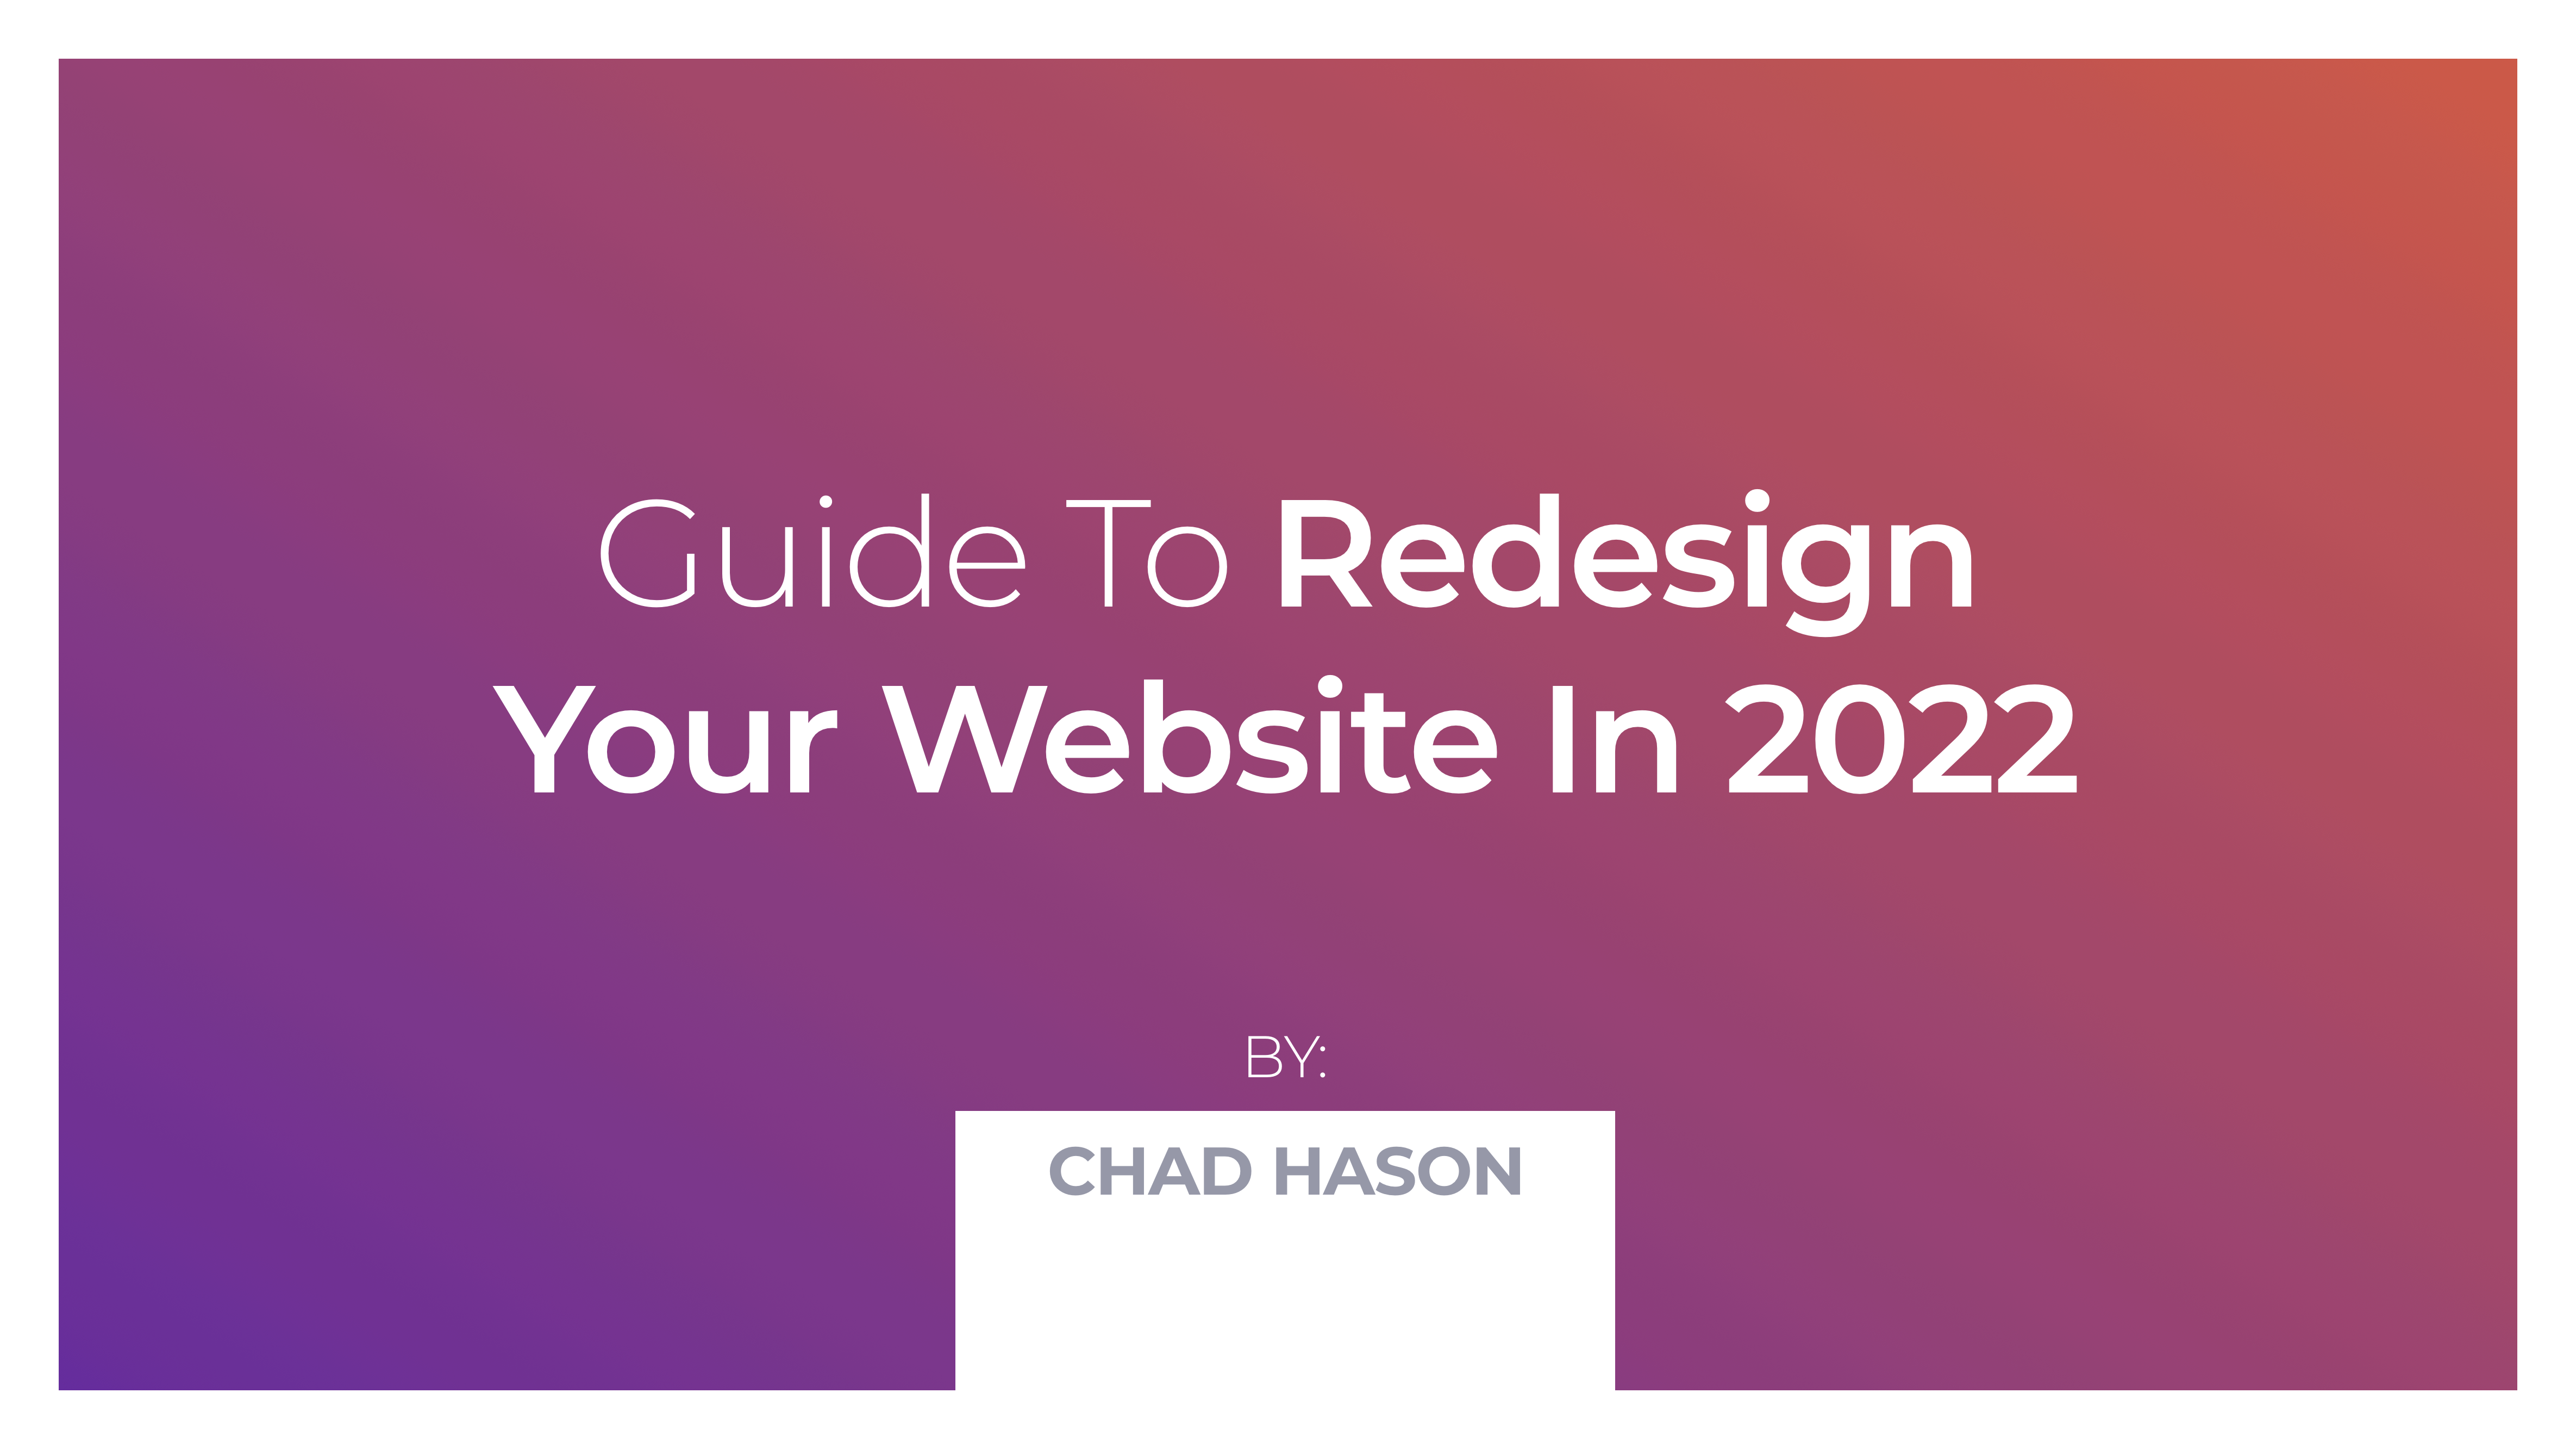 Guide To Redesign Your Website In 2022